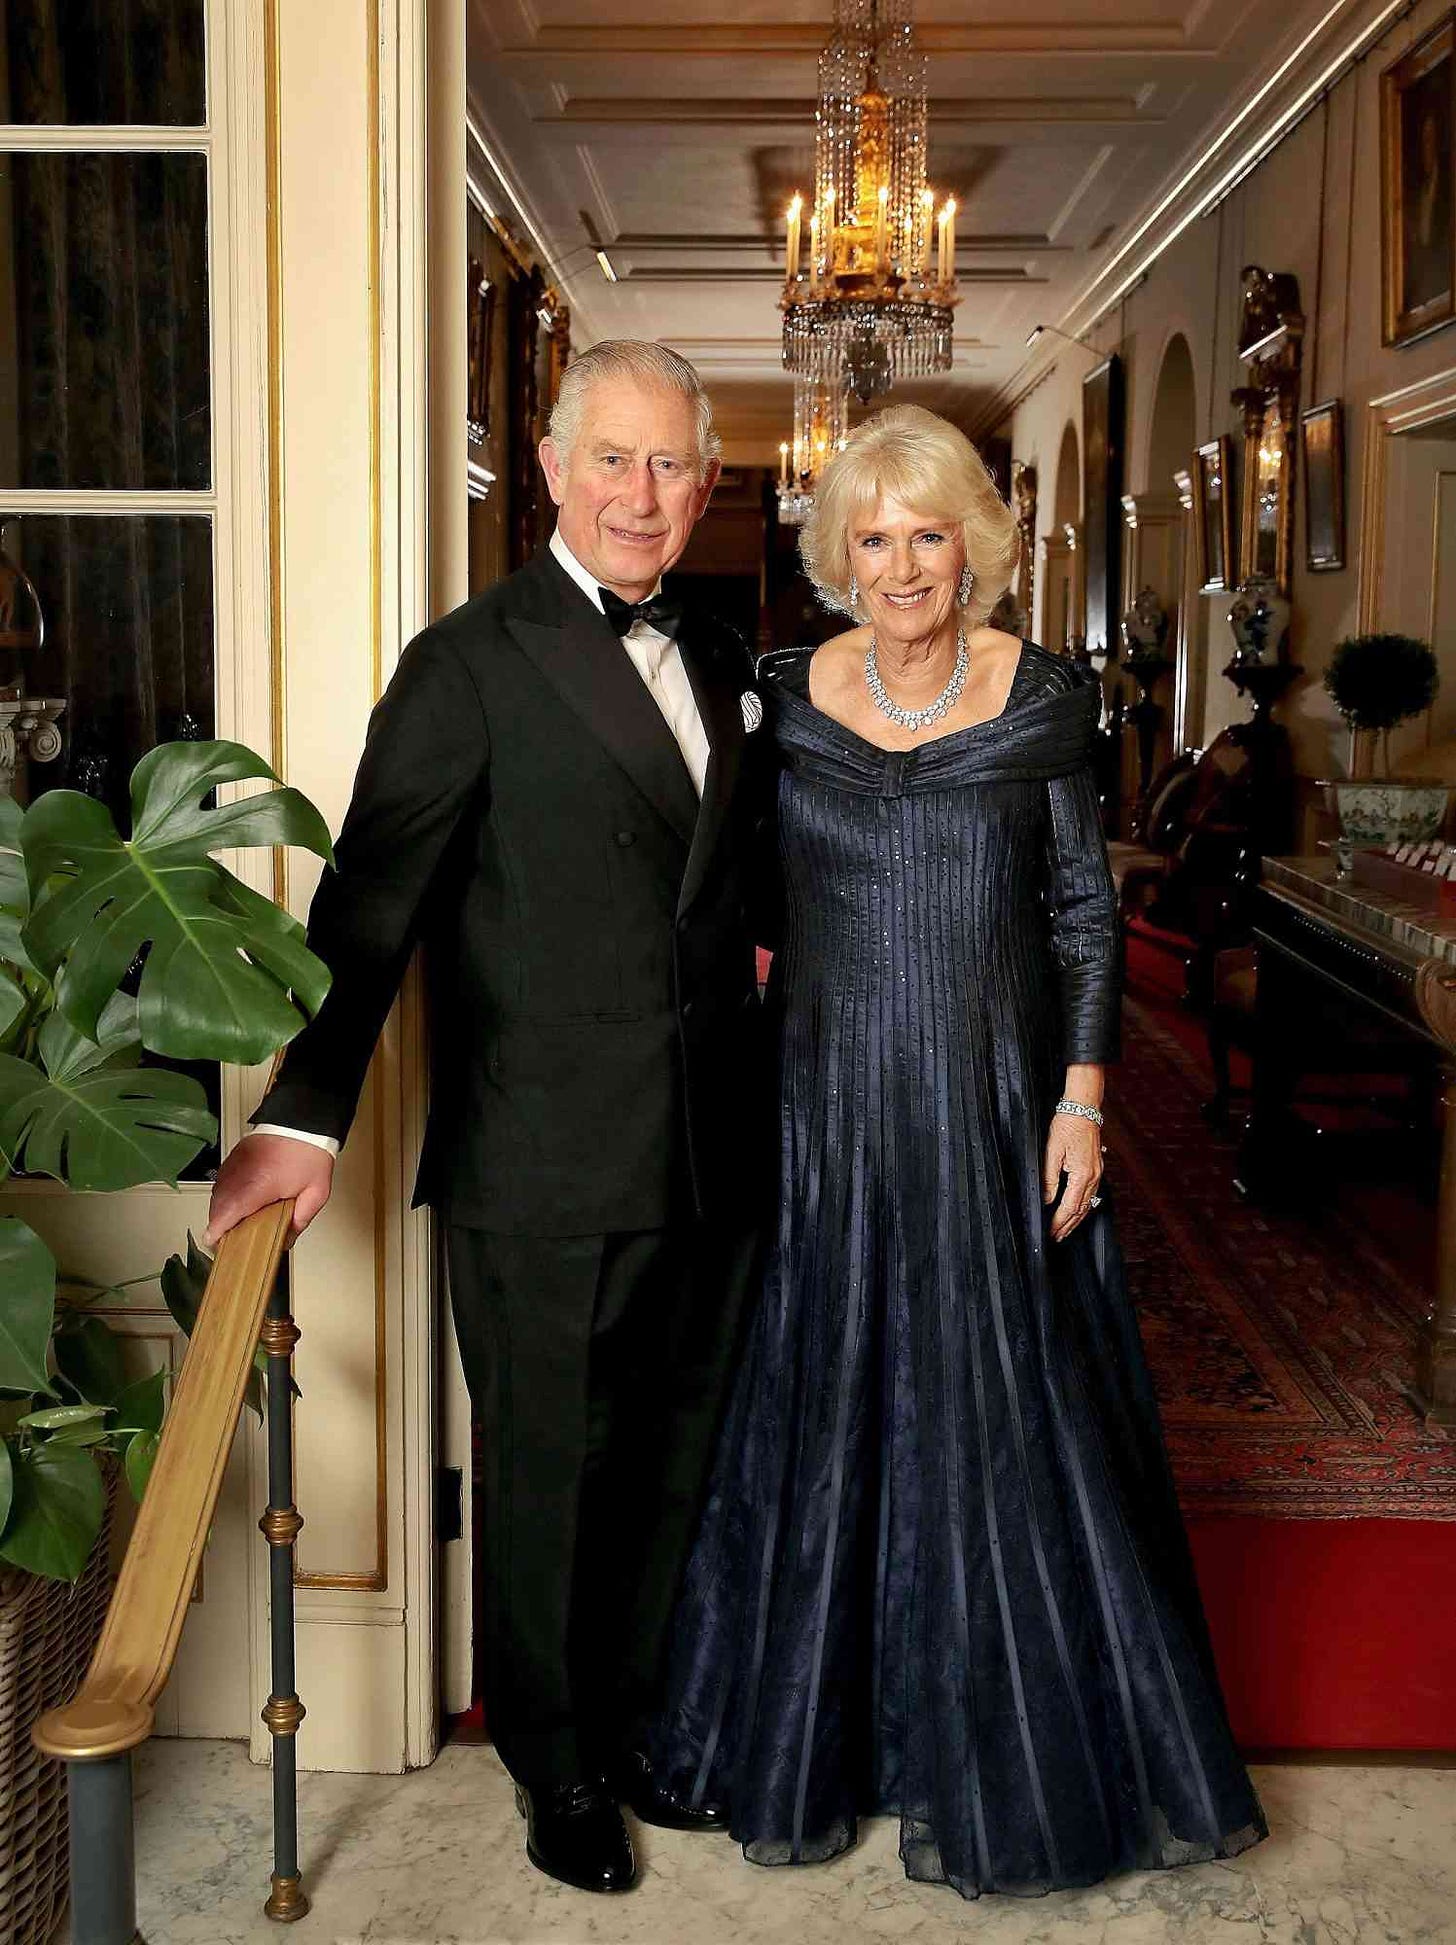 Prince Charles Poses with Wife Camilla Before His Birthday Party